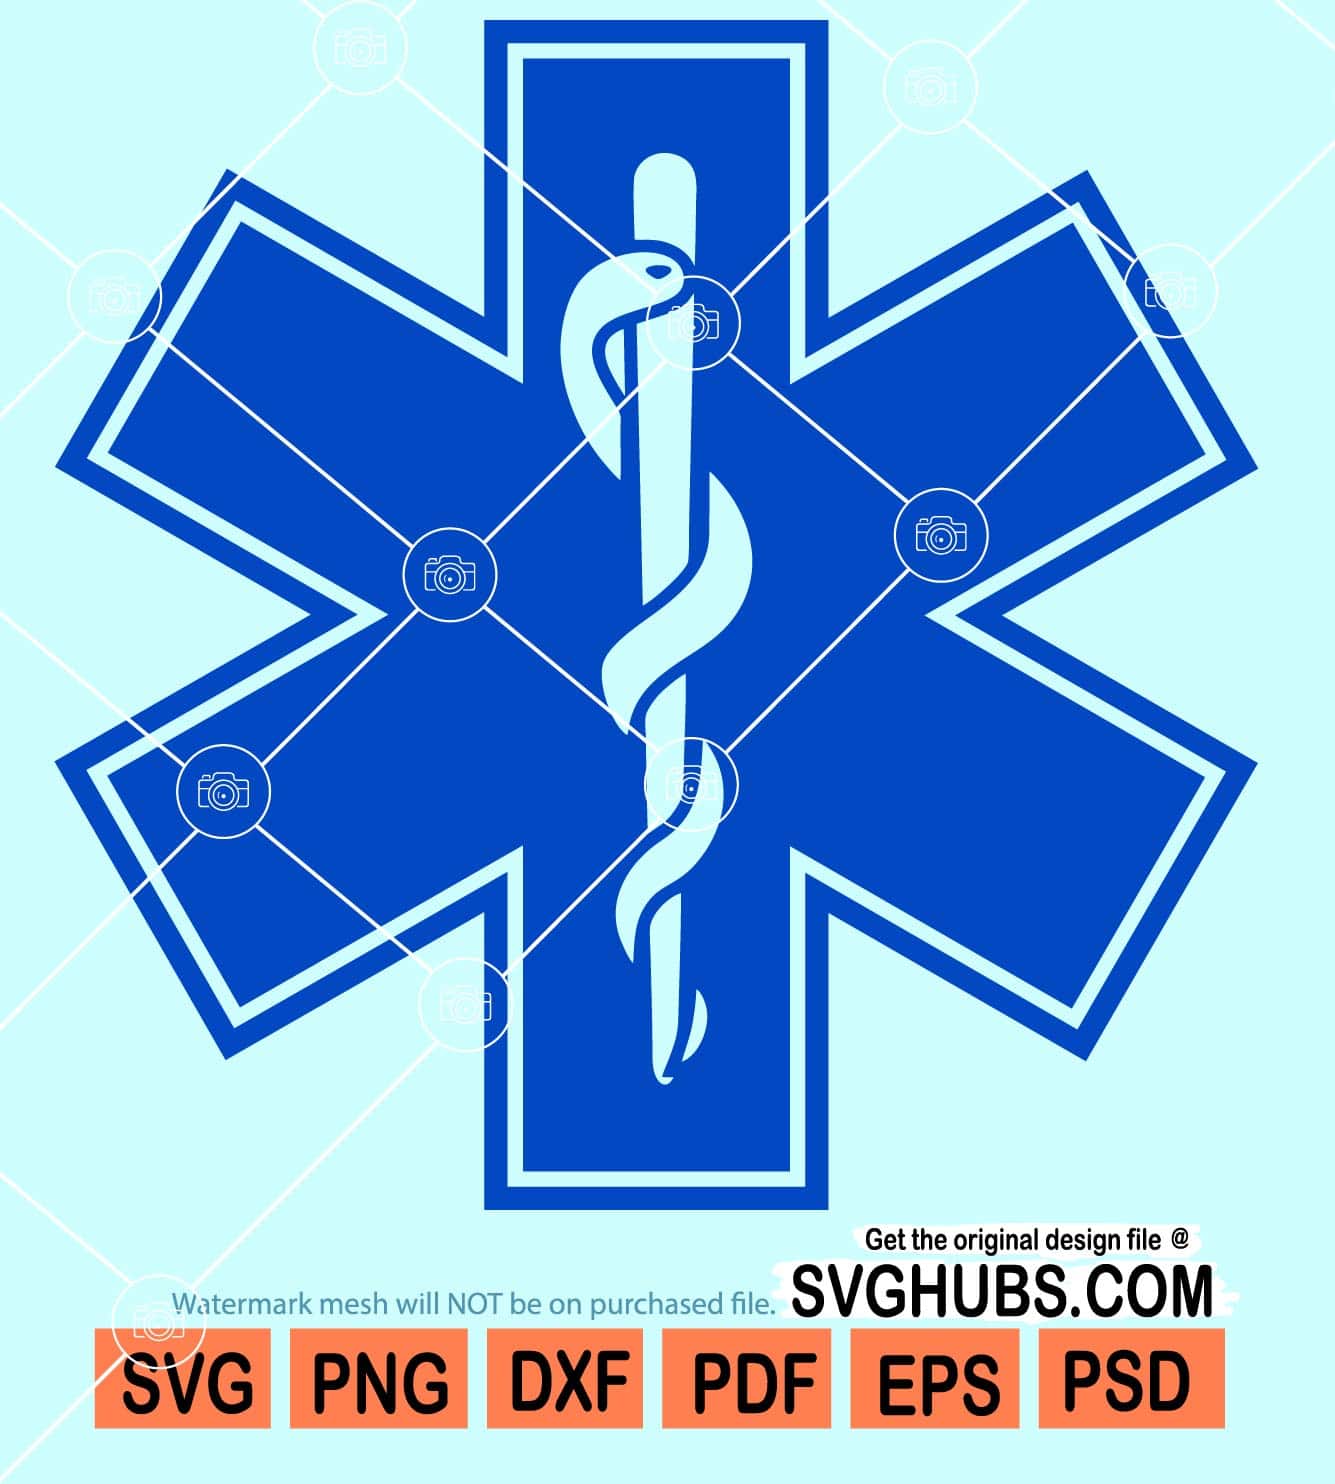 DXF File "star of life" 